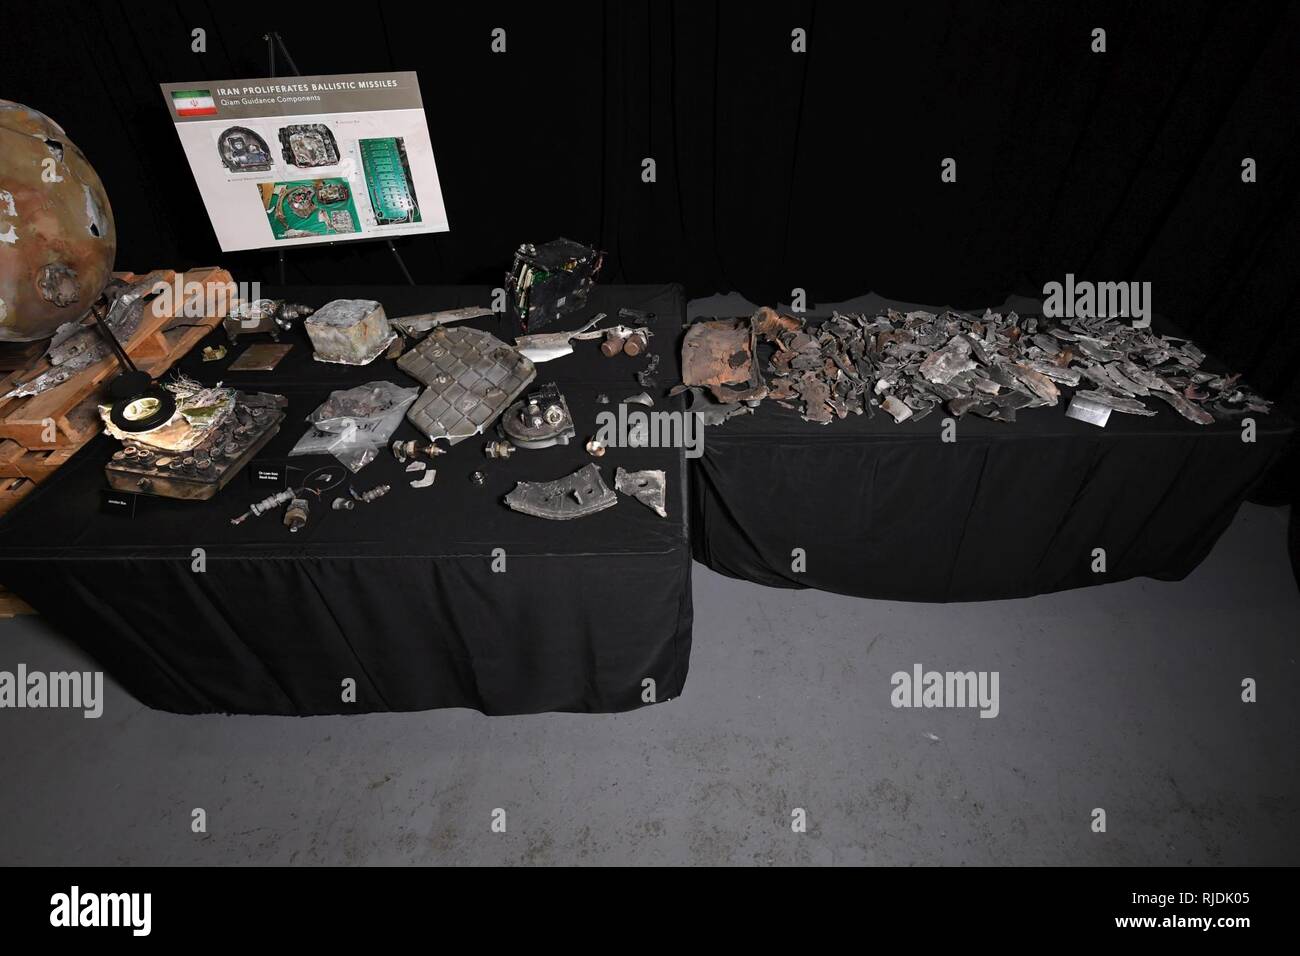 A display shows remnants of Iranian Qiam class missile guidance system at Joint Base Anacostia-Boling in Washington, D.C. Jan. 24, 2018. Missile remnants from two Qiam missiles fired into Saudi Arabia from Yemen’s Houthi rebels in 2017, are now part of a multi-national collection of evidence proving Iranian weapons proliferation in violation of United Nations resolutions 2216 and 2231. Stock Photo